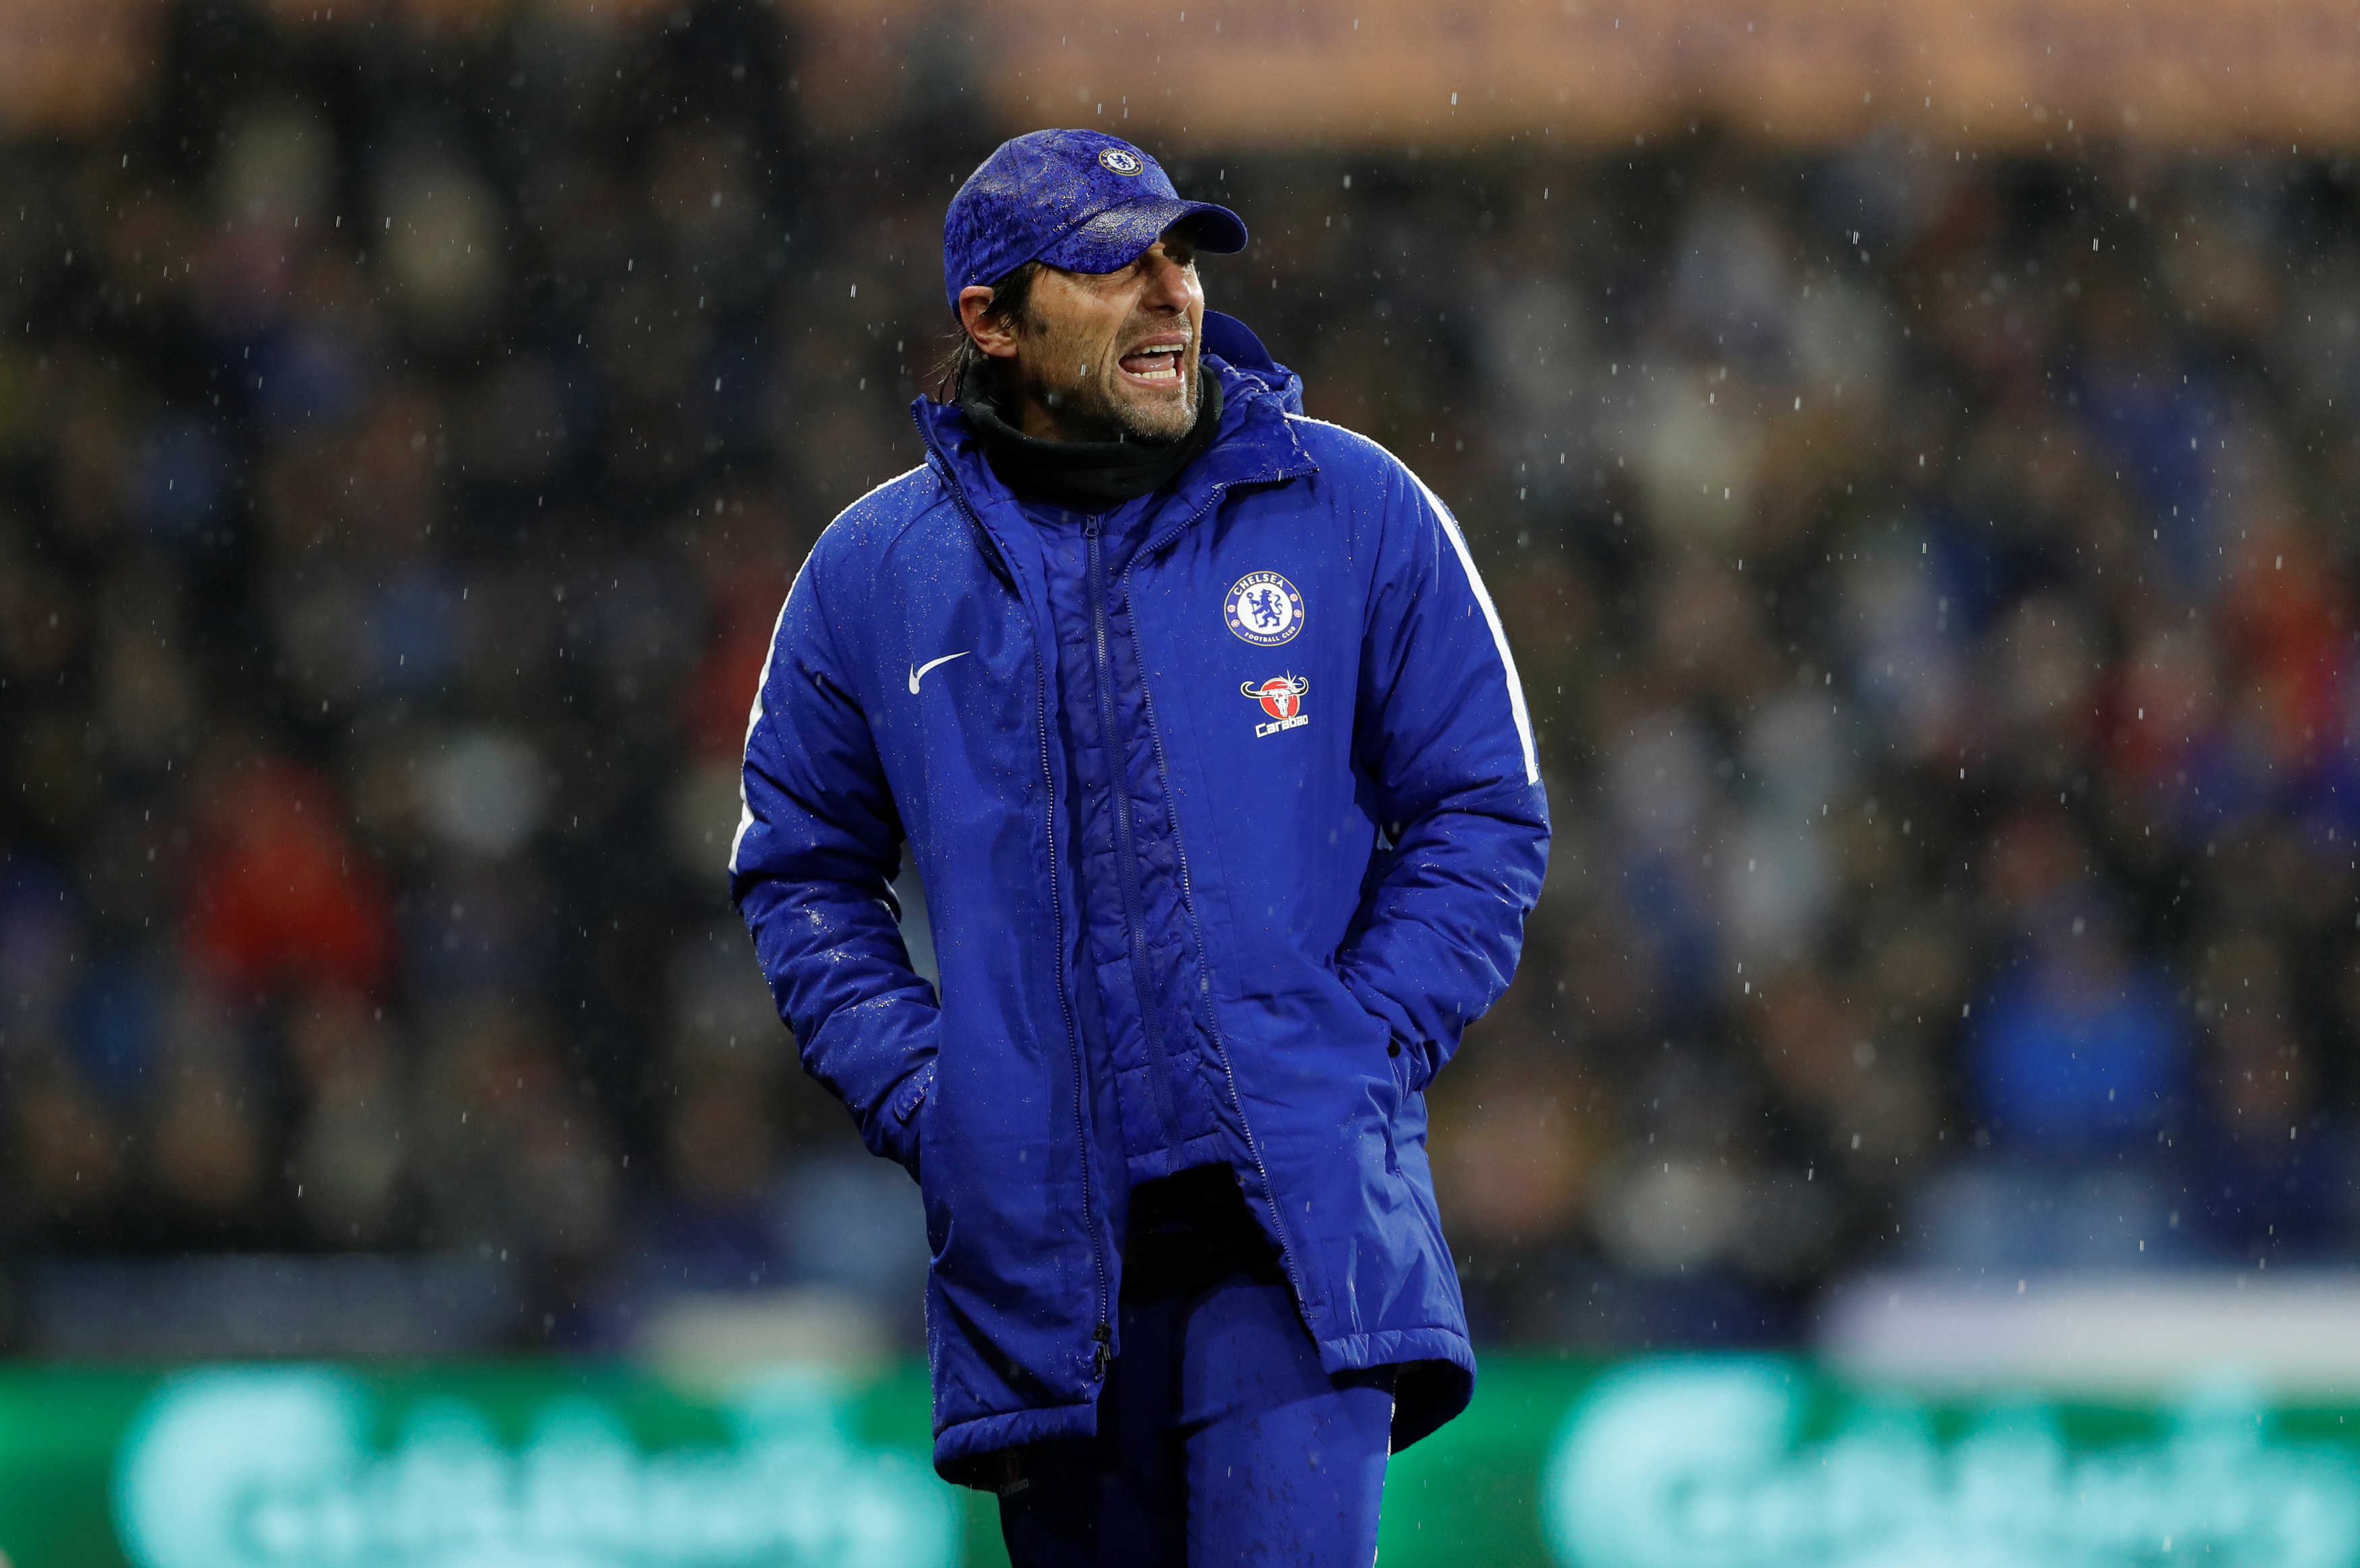 Football: Chelsea's Conte to ring changes for Bournemouth clash